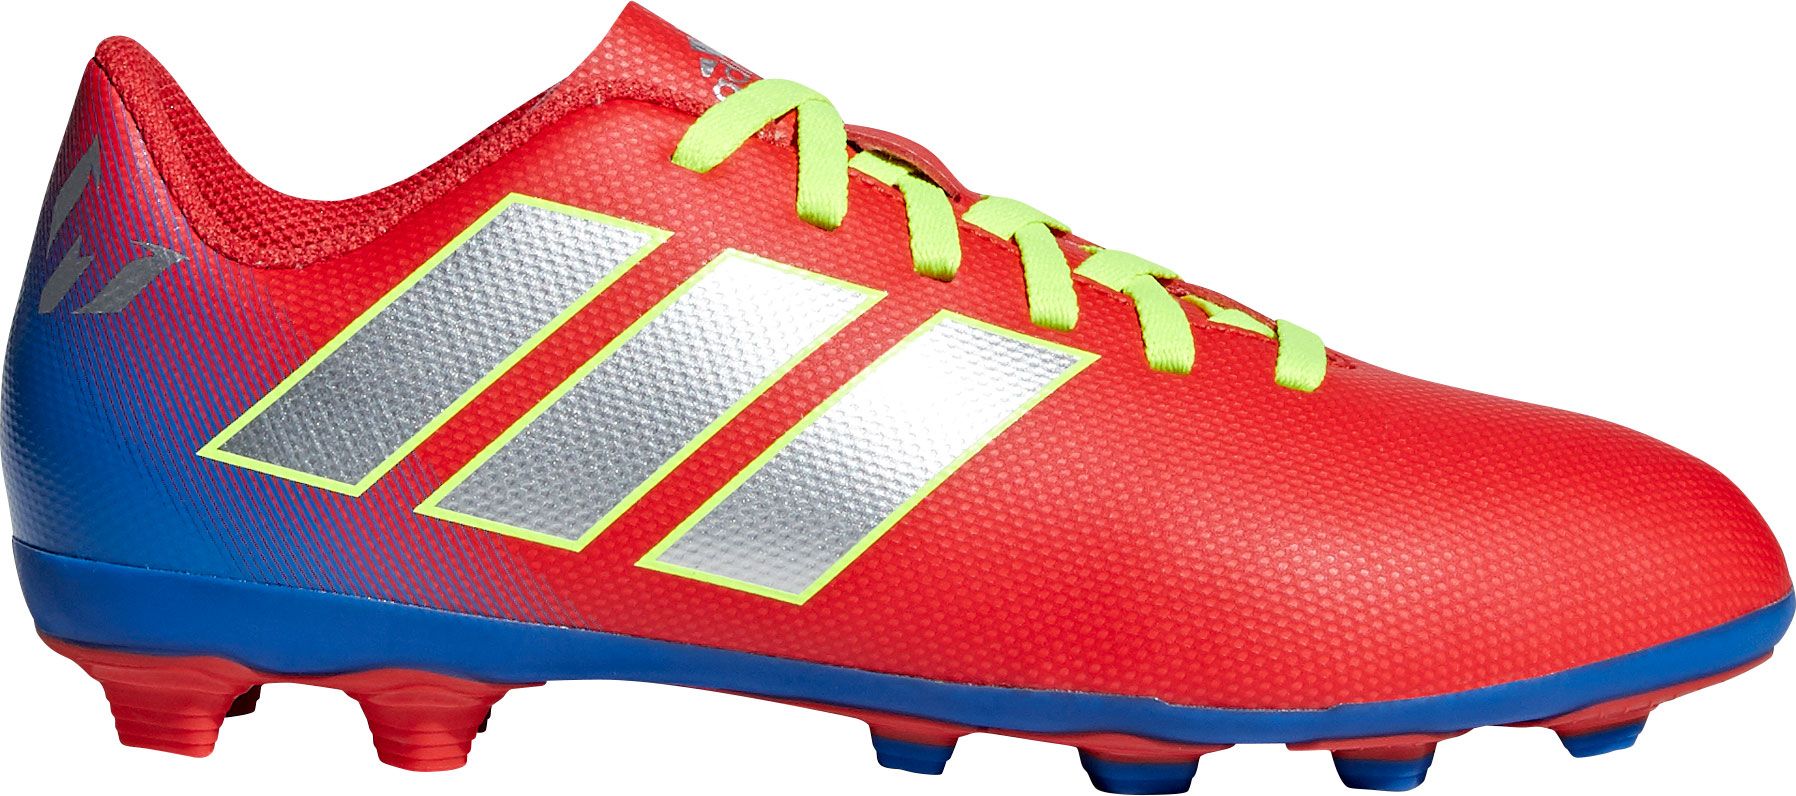 adidas messi youth